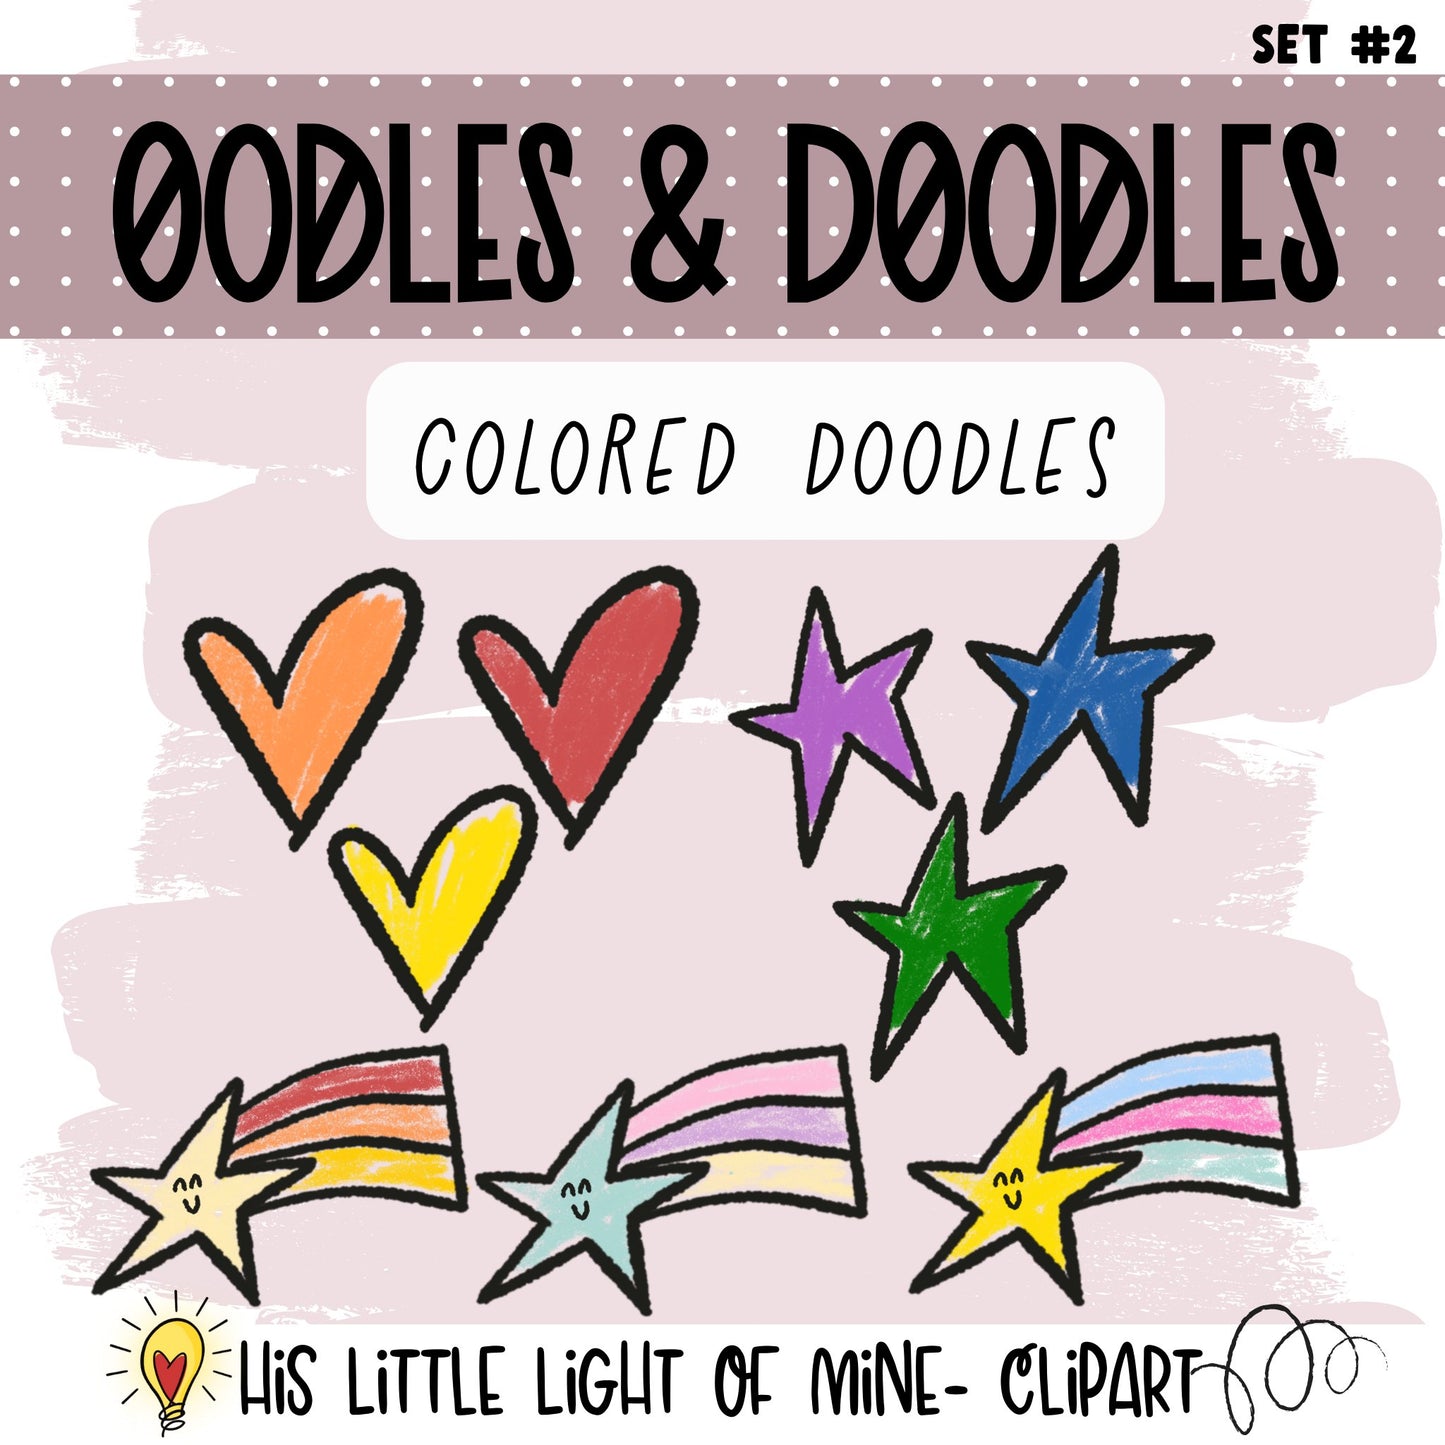 Oodles & Doodles Clip Art Set #2 clip art pack showing colored doodles of hearts, stars and shooting stars.